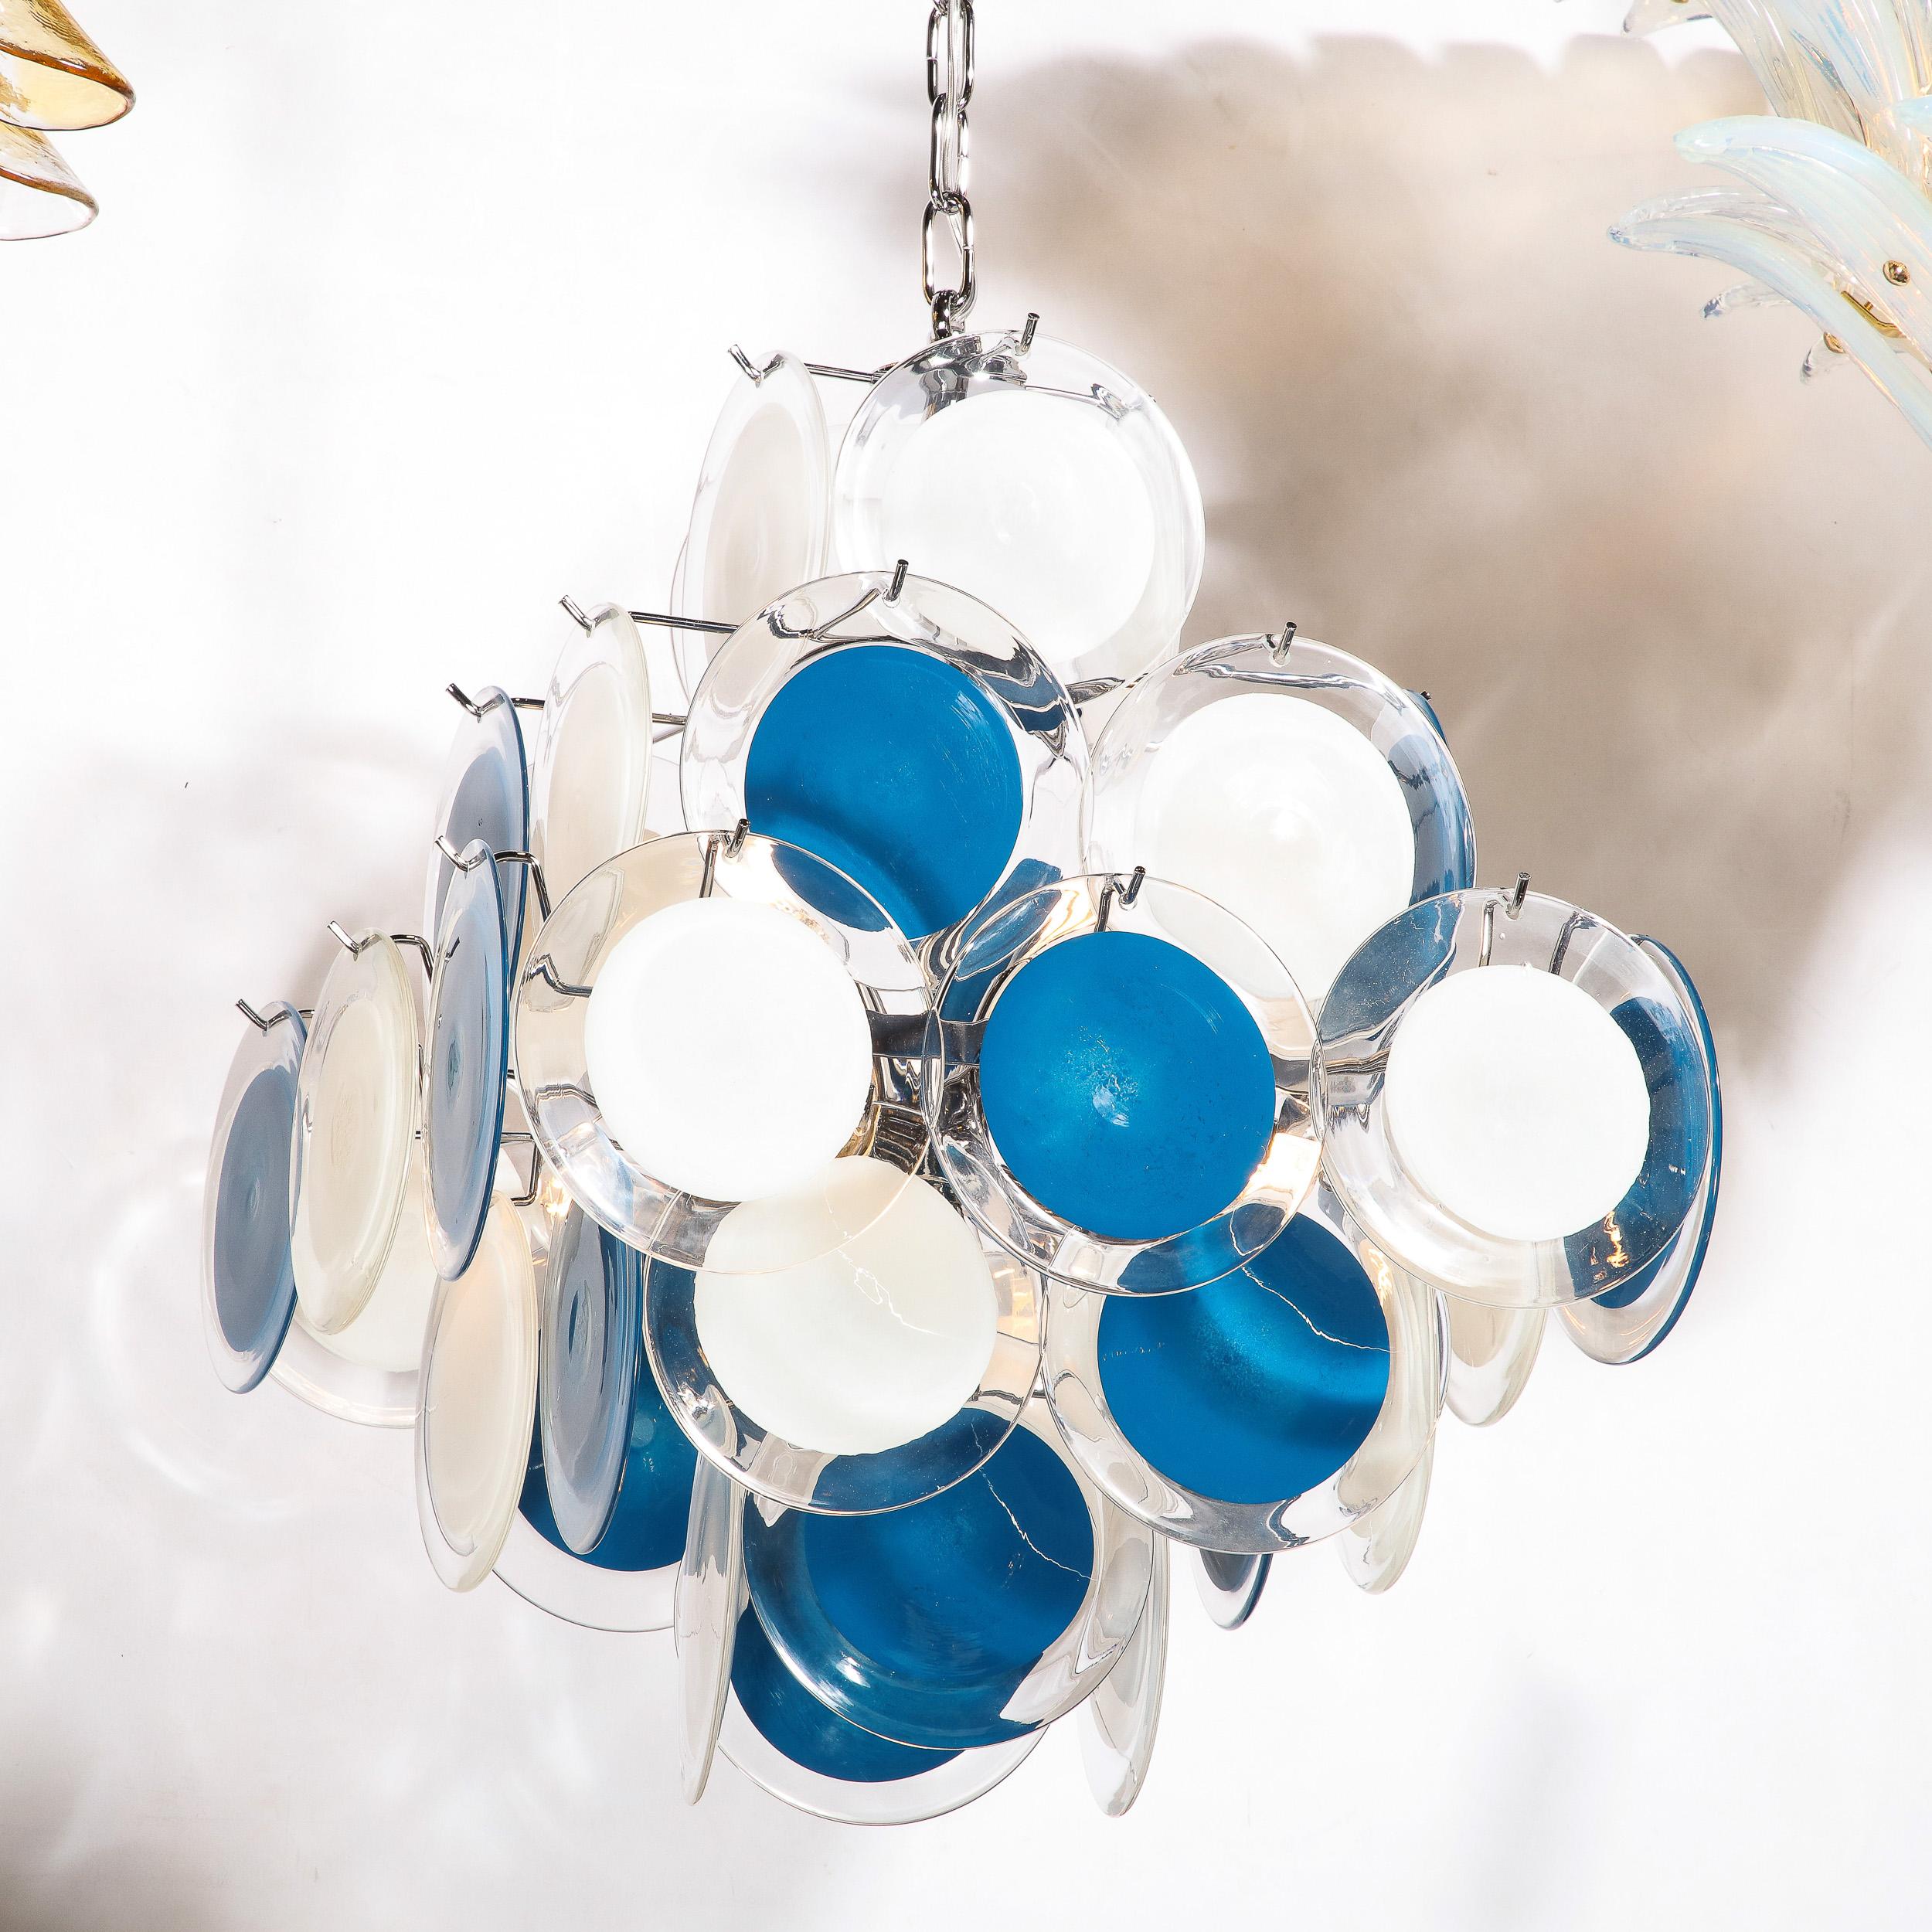 Murano Glass Modernist Pagoda Chandelier in Chrome & Handblown Murano White and Blue Discs For Sale